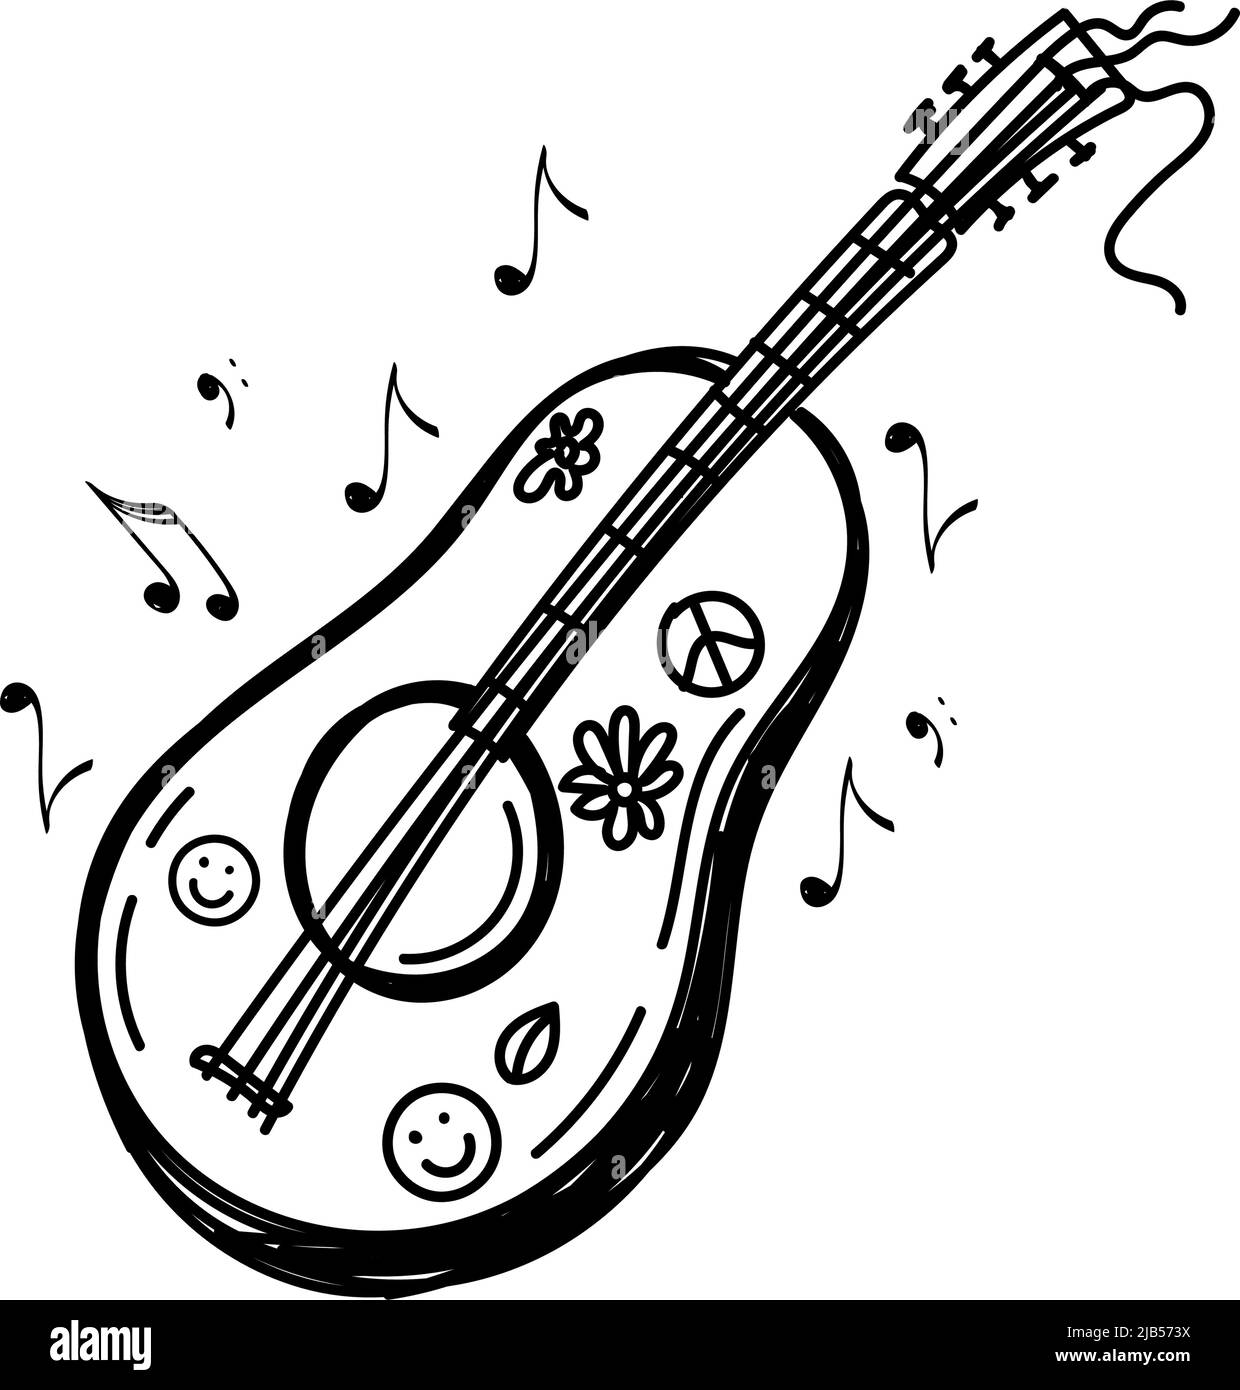 Guitar, a hand-drawn doodle. A stringed plucked musical instrument. Classical guitar. Small acoustic guitar or ukulele. A blues or rock style instrume Stock Vector